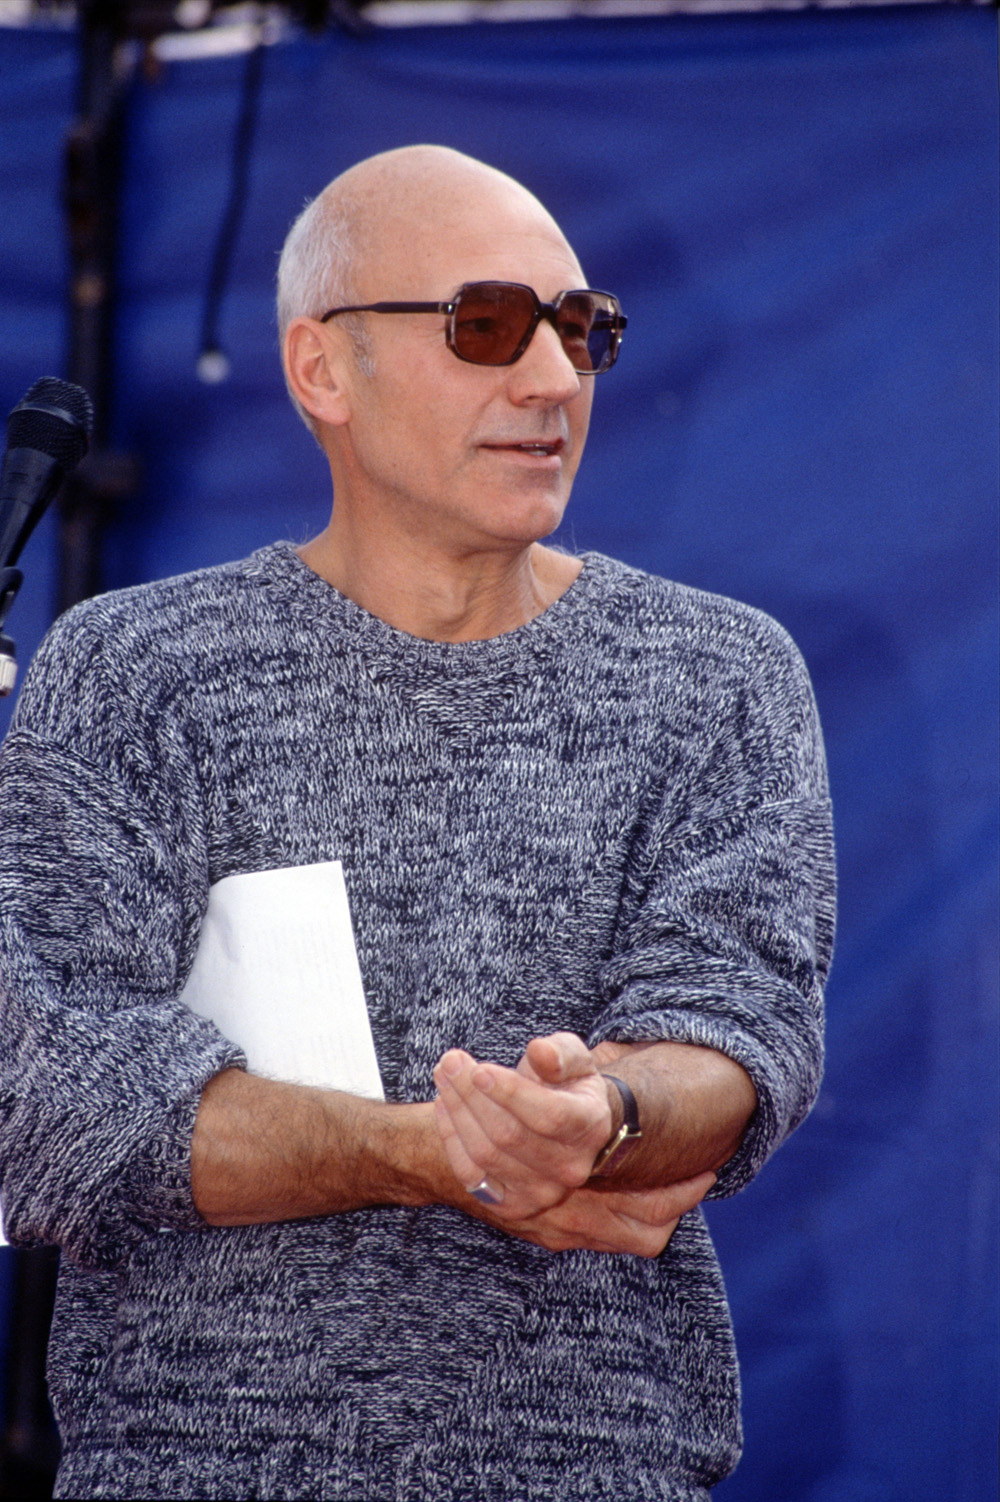 <p>Patrick Stewart attends a concert to Save the Rose Theatre in London’s Southwark neighborhood in 1989. He wore a heathered sweater and cool sunglasses.</p>